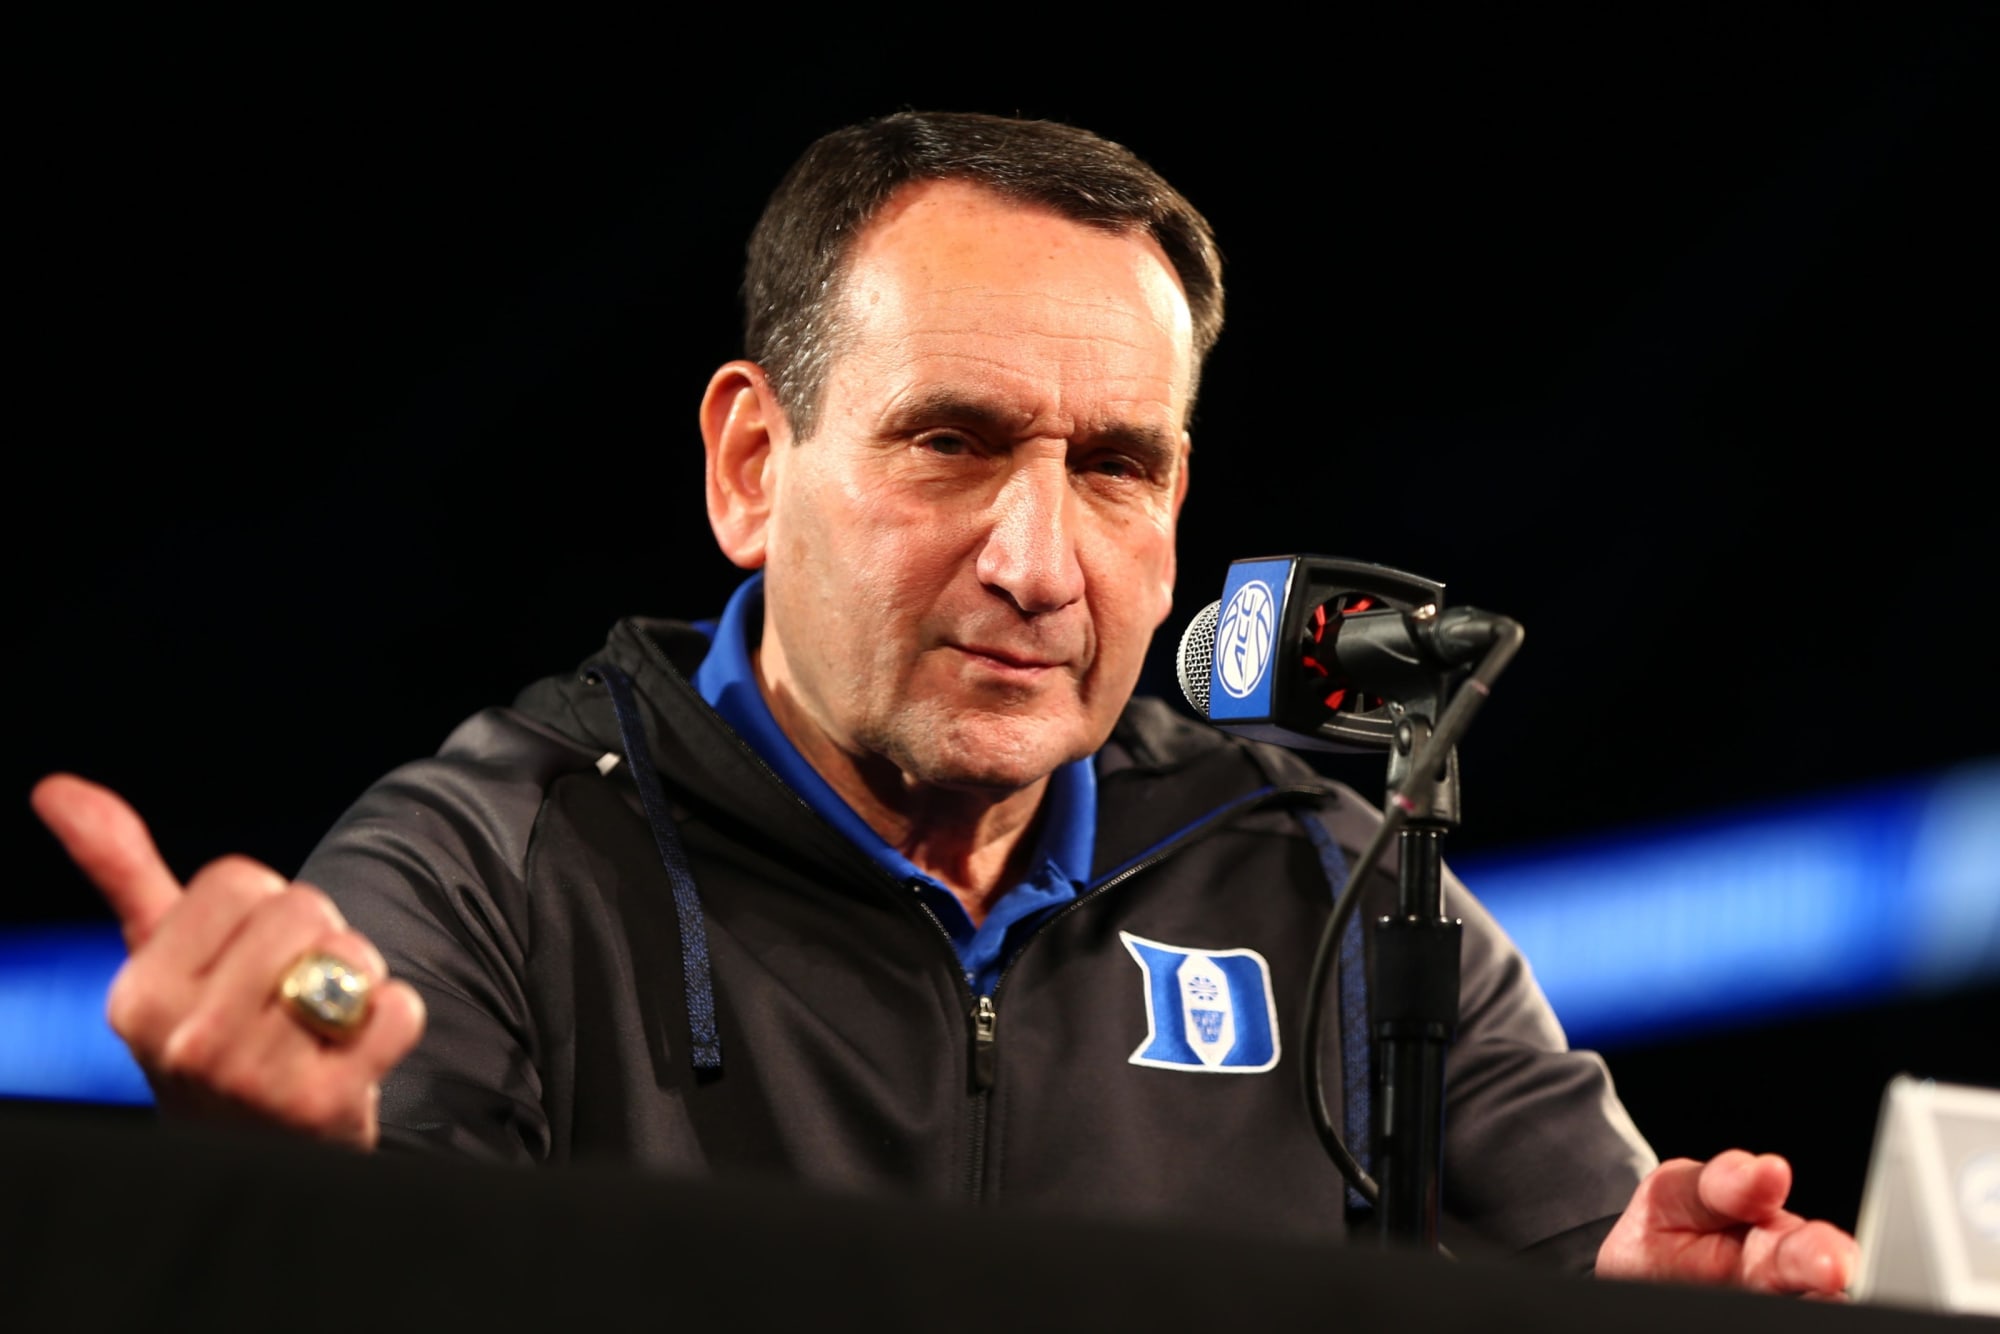 Coach K ignoring two players too often